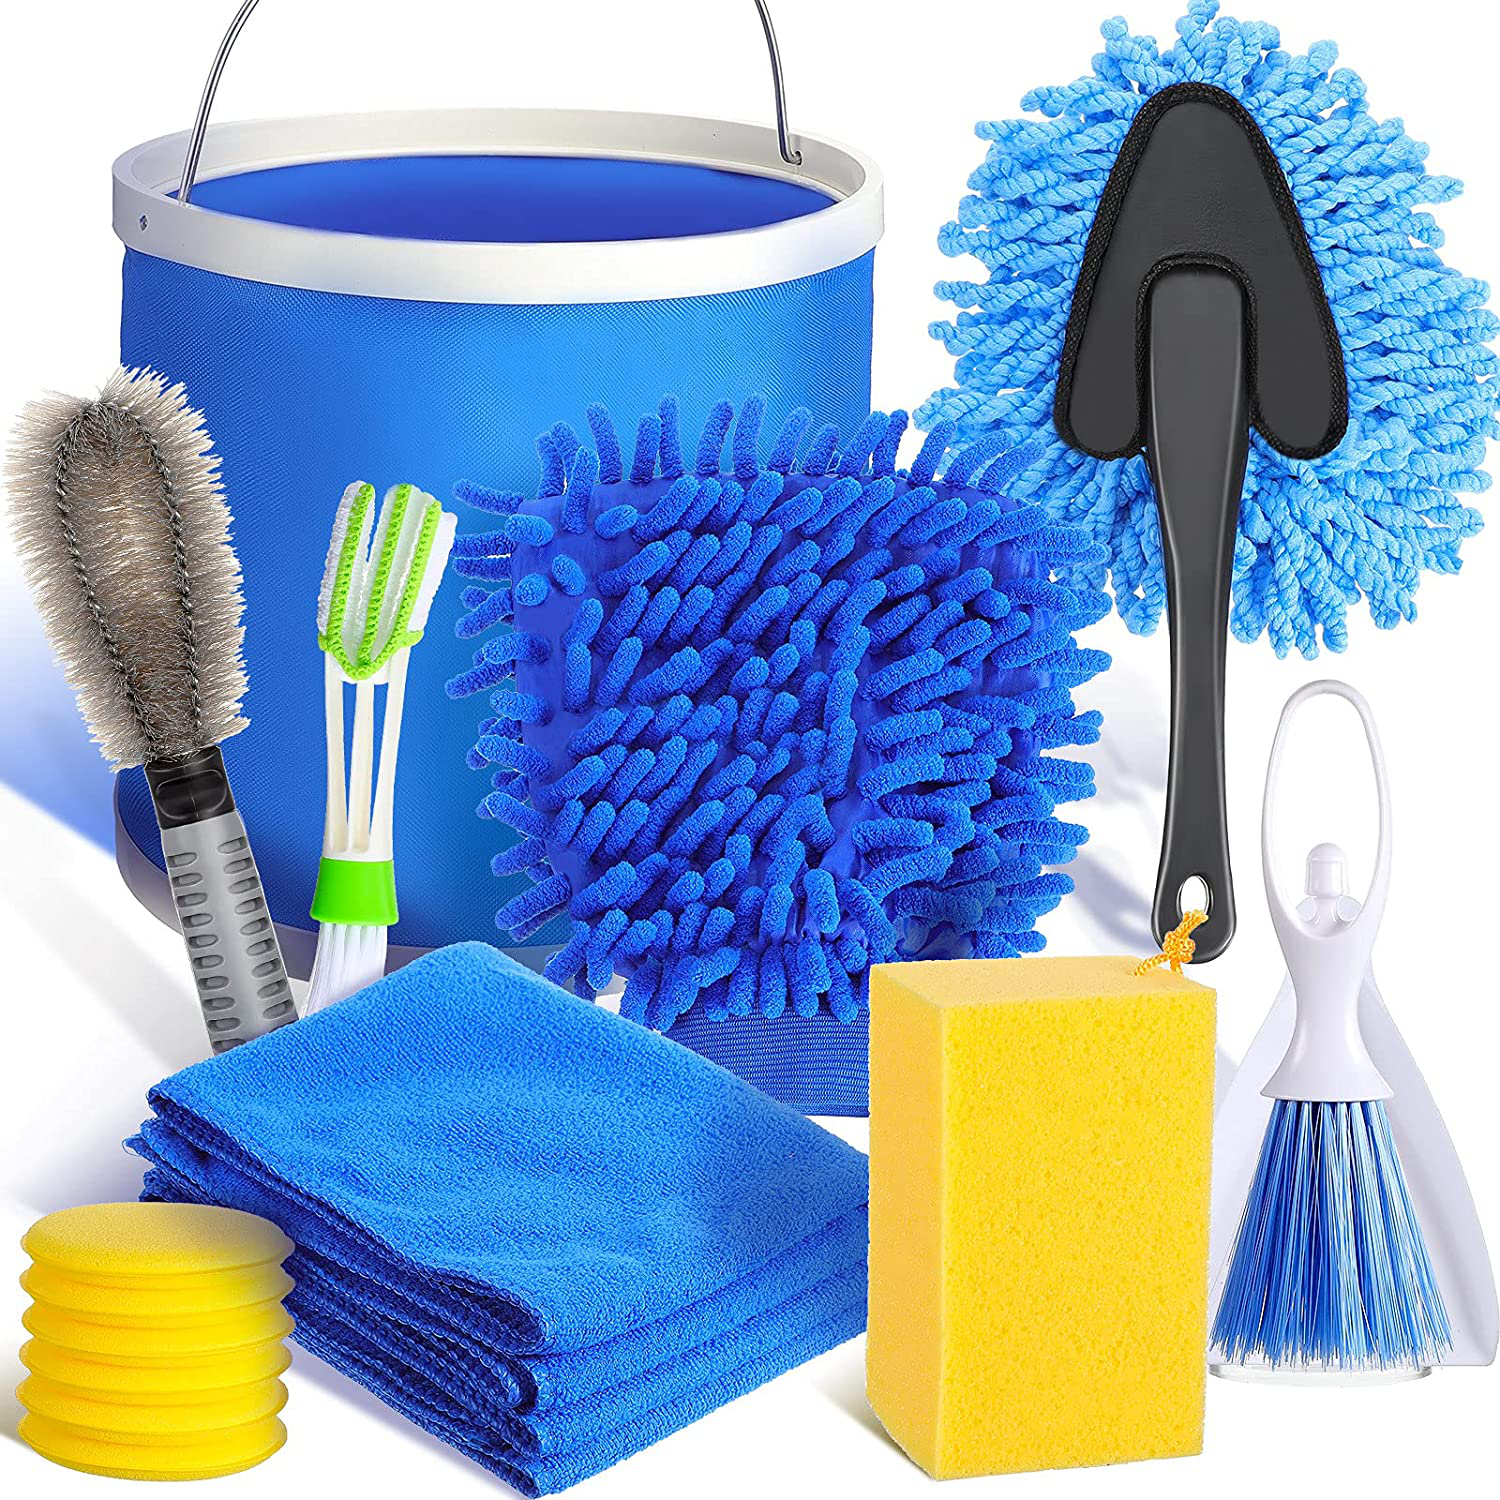 15 Pieces Car Wash Cleaning Tools Kit with Bucket Accessories Car Detailing Cleaning Brushes Kit Car Interior Washing Tool Set Car Wash Kit with Sponge, Towel, Double Head Duster for Truck Motorcycle